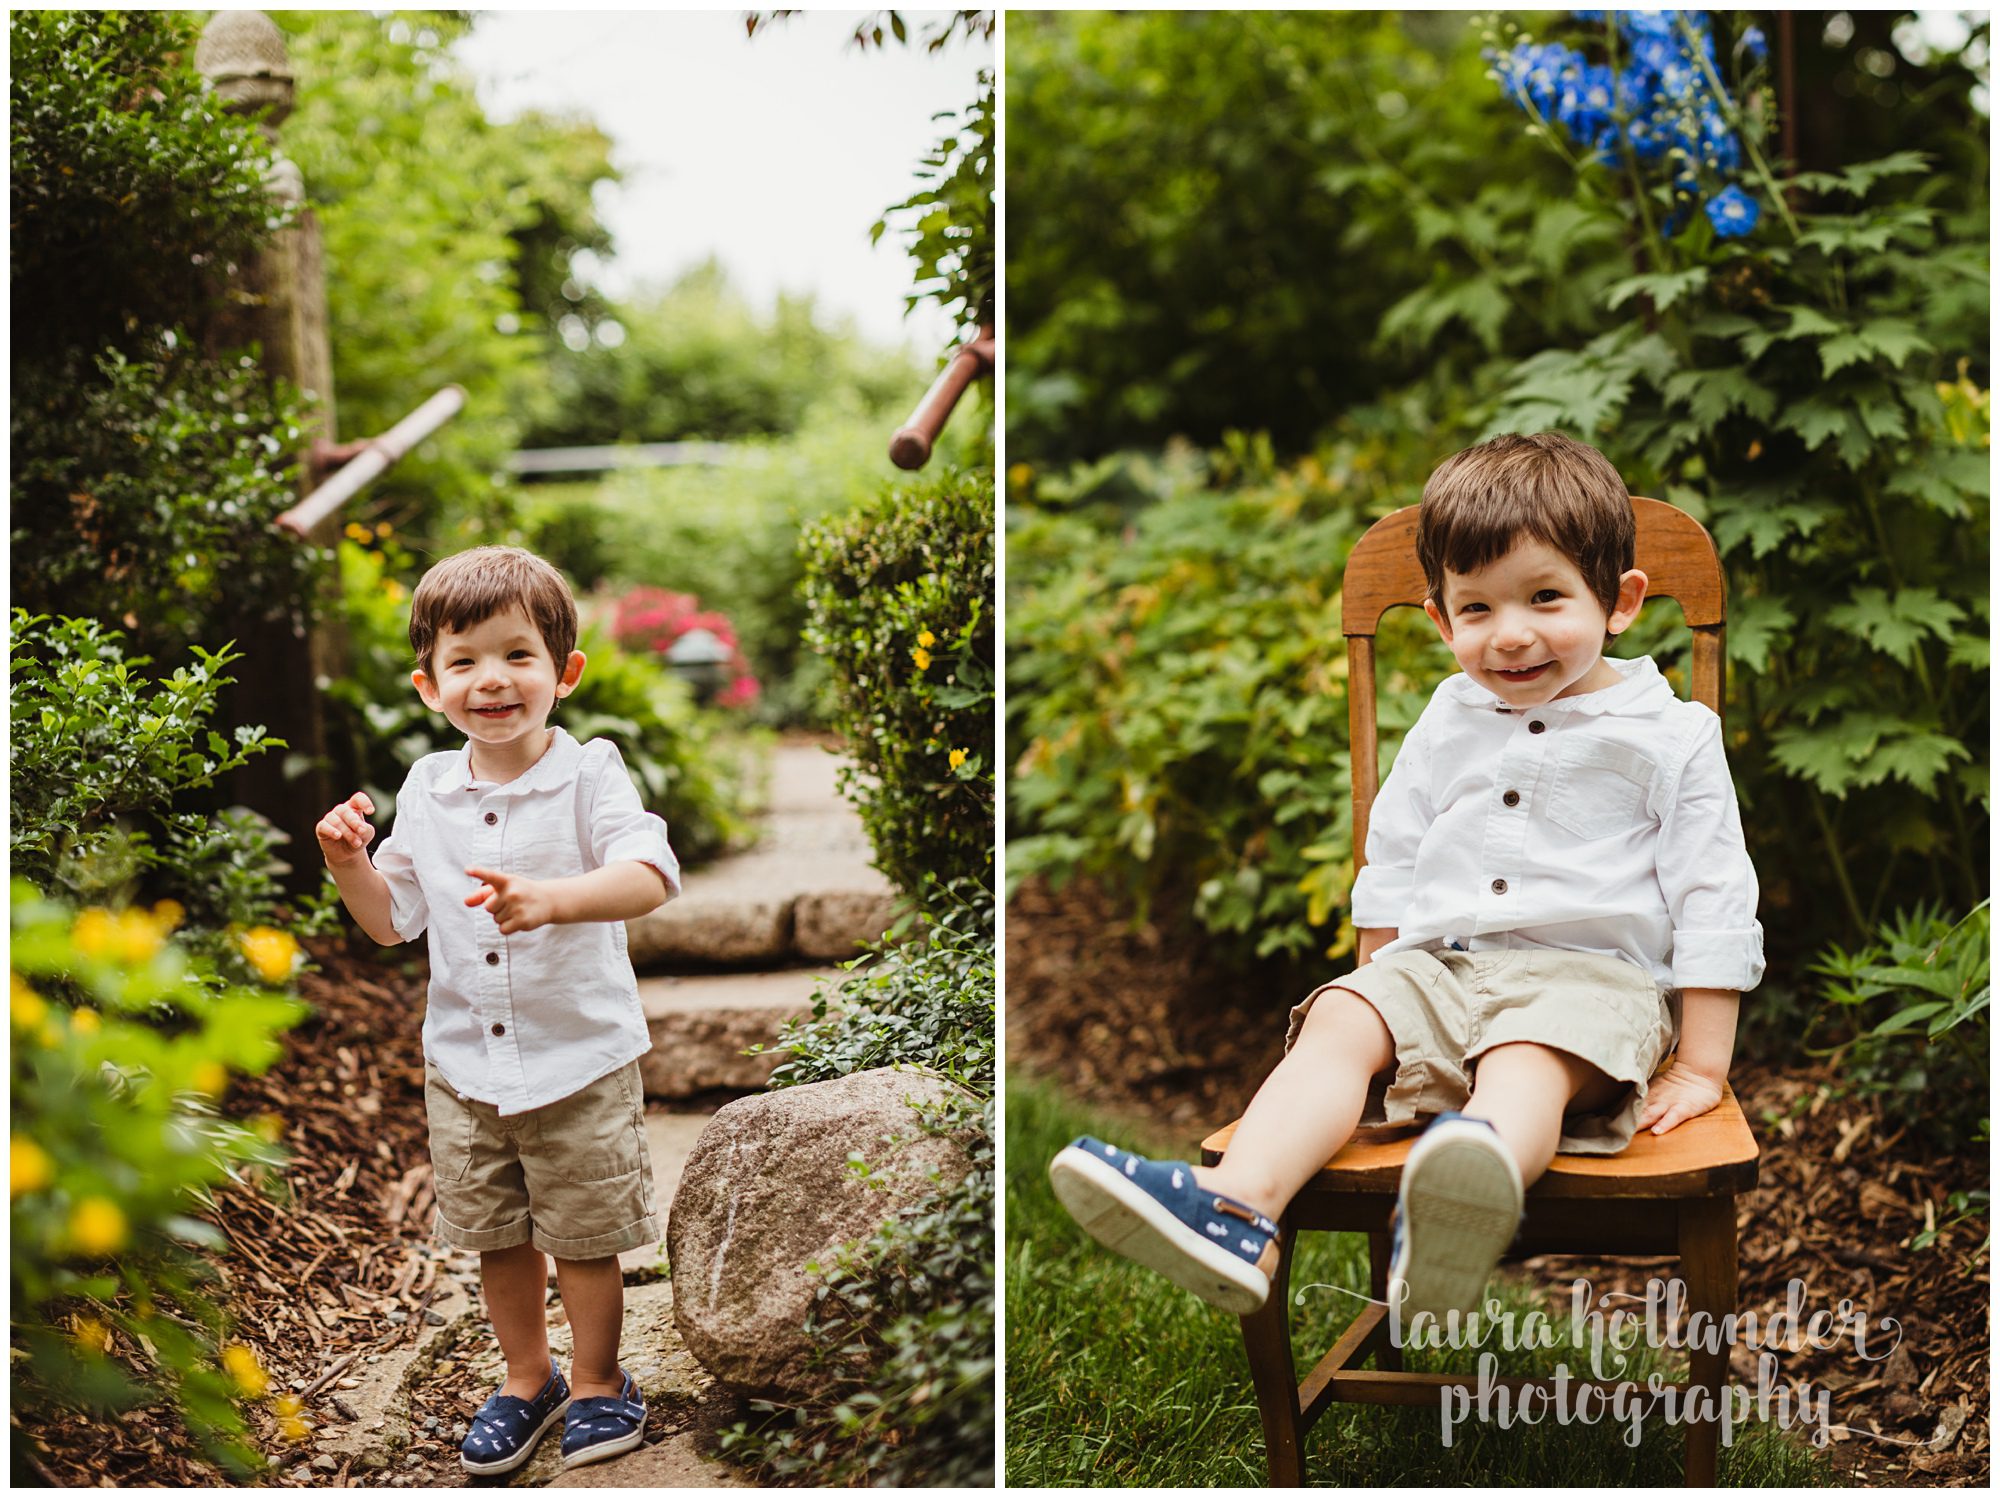 two year old garden session in Battle Creek MI with Laura Hollander Photography